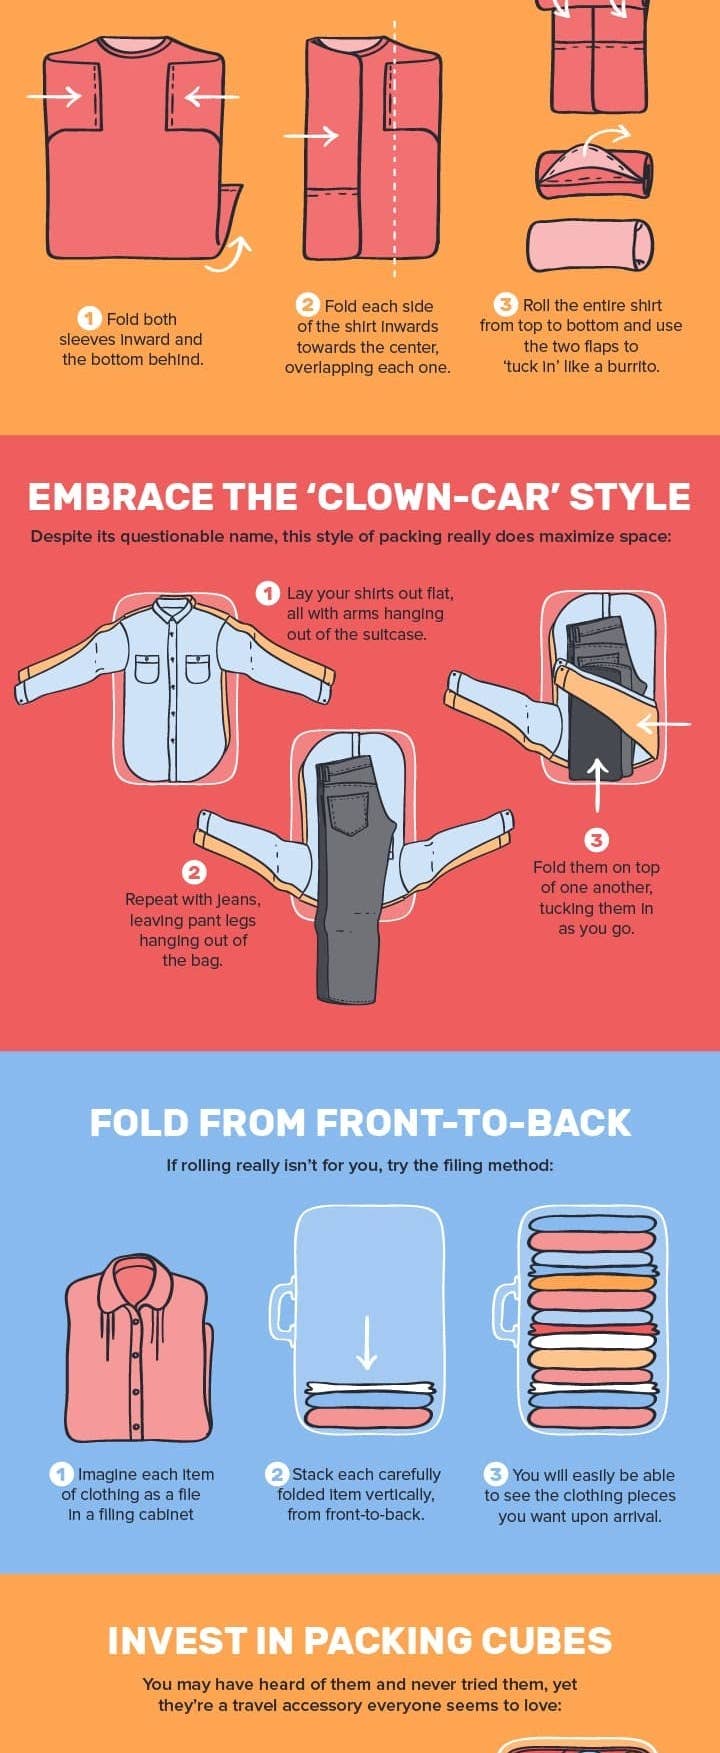 Take note of these five packing tips for quick trips